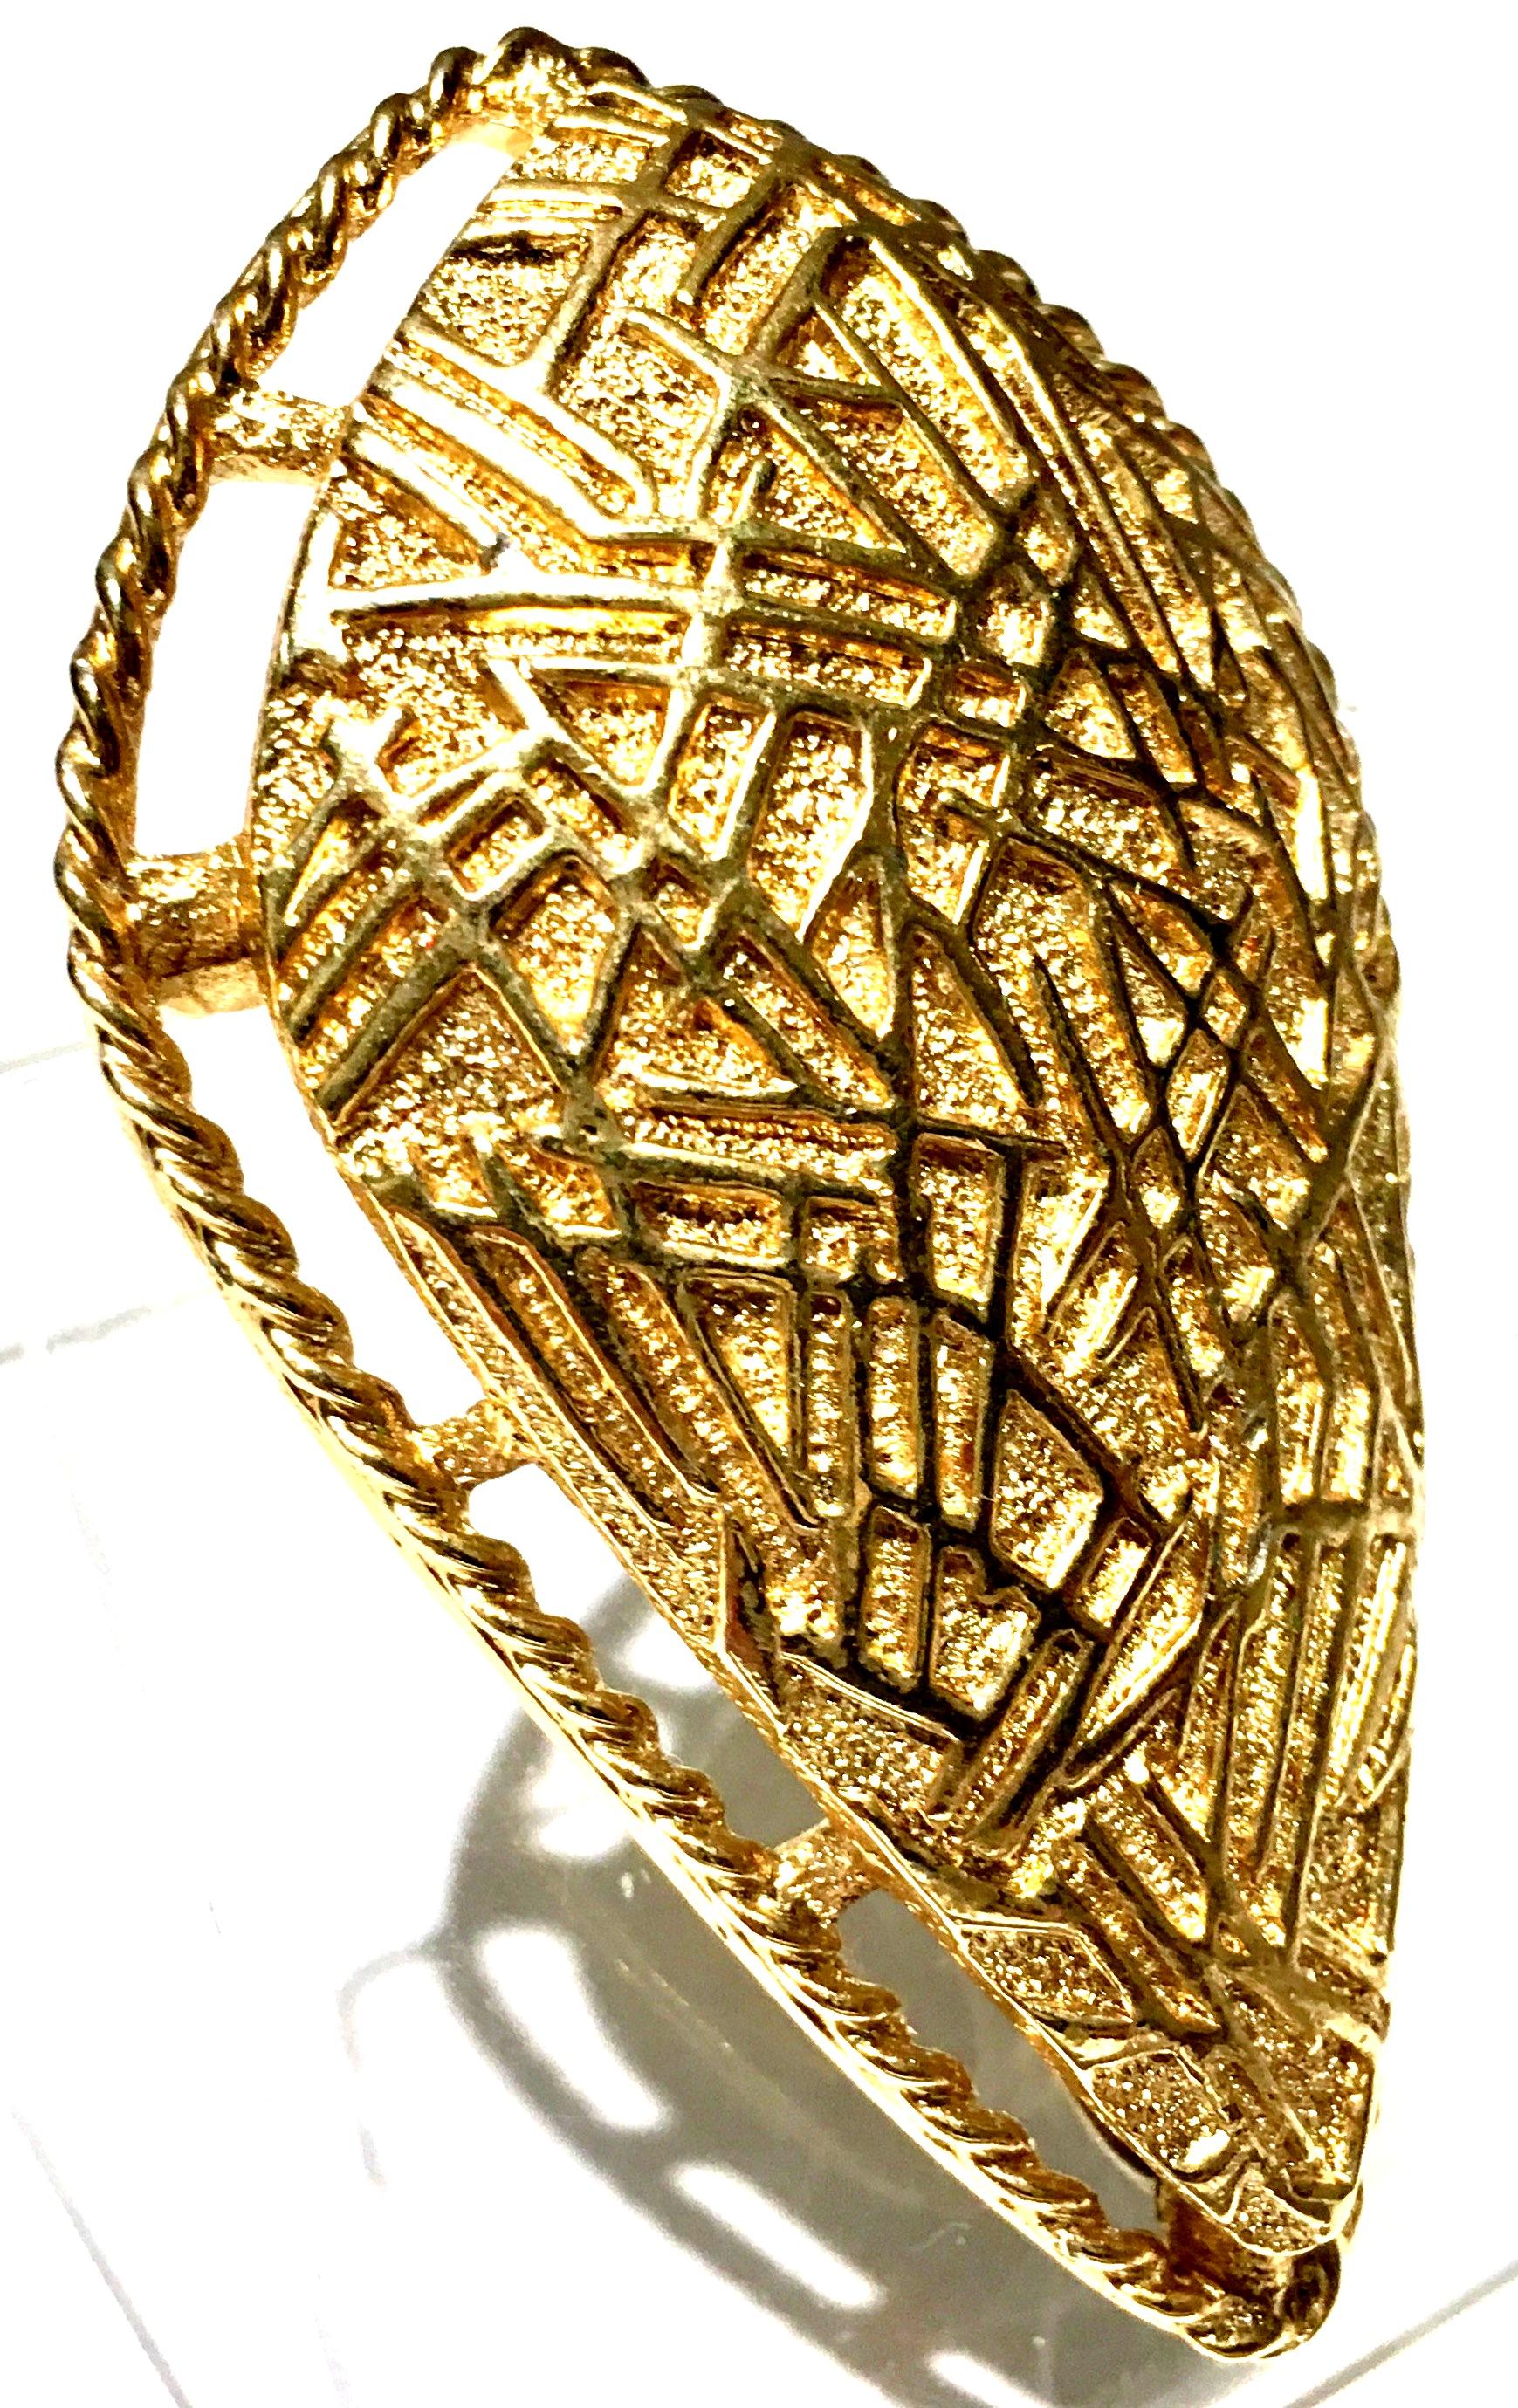 20th Century Art Deco Style Gold Plate Brooch & Necklace Pendant By, Coventry. Signed on the underside, Sarah Cov. This large scale gold Art Deco Style brooch features a dimensional and abstract pattern with a pendant necklace bale on the underside.